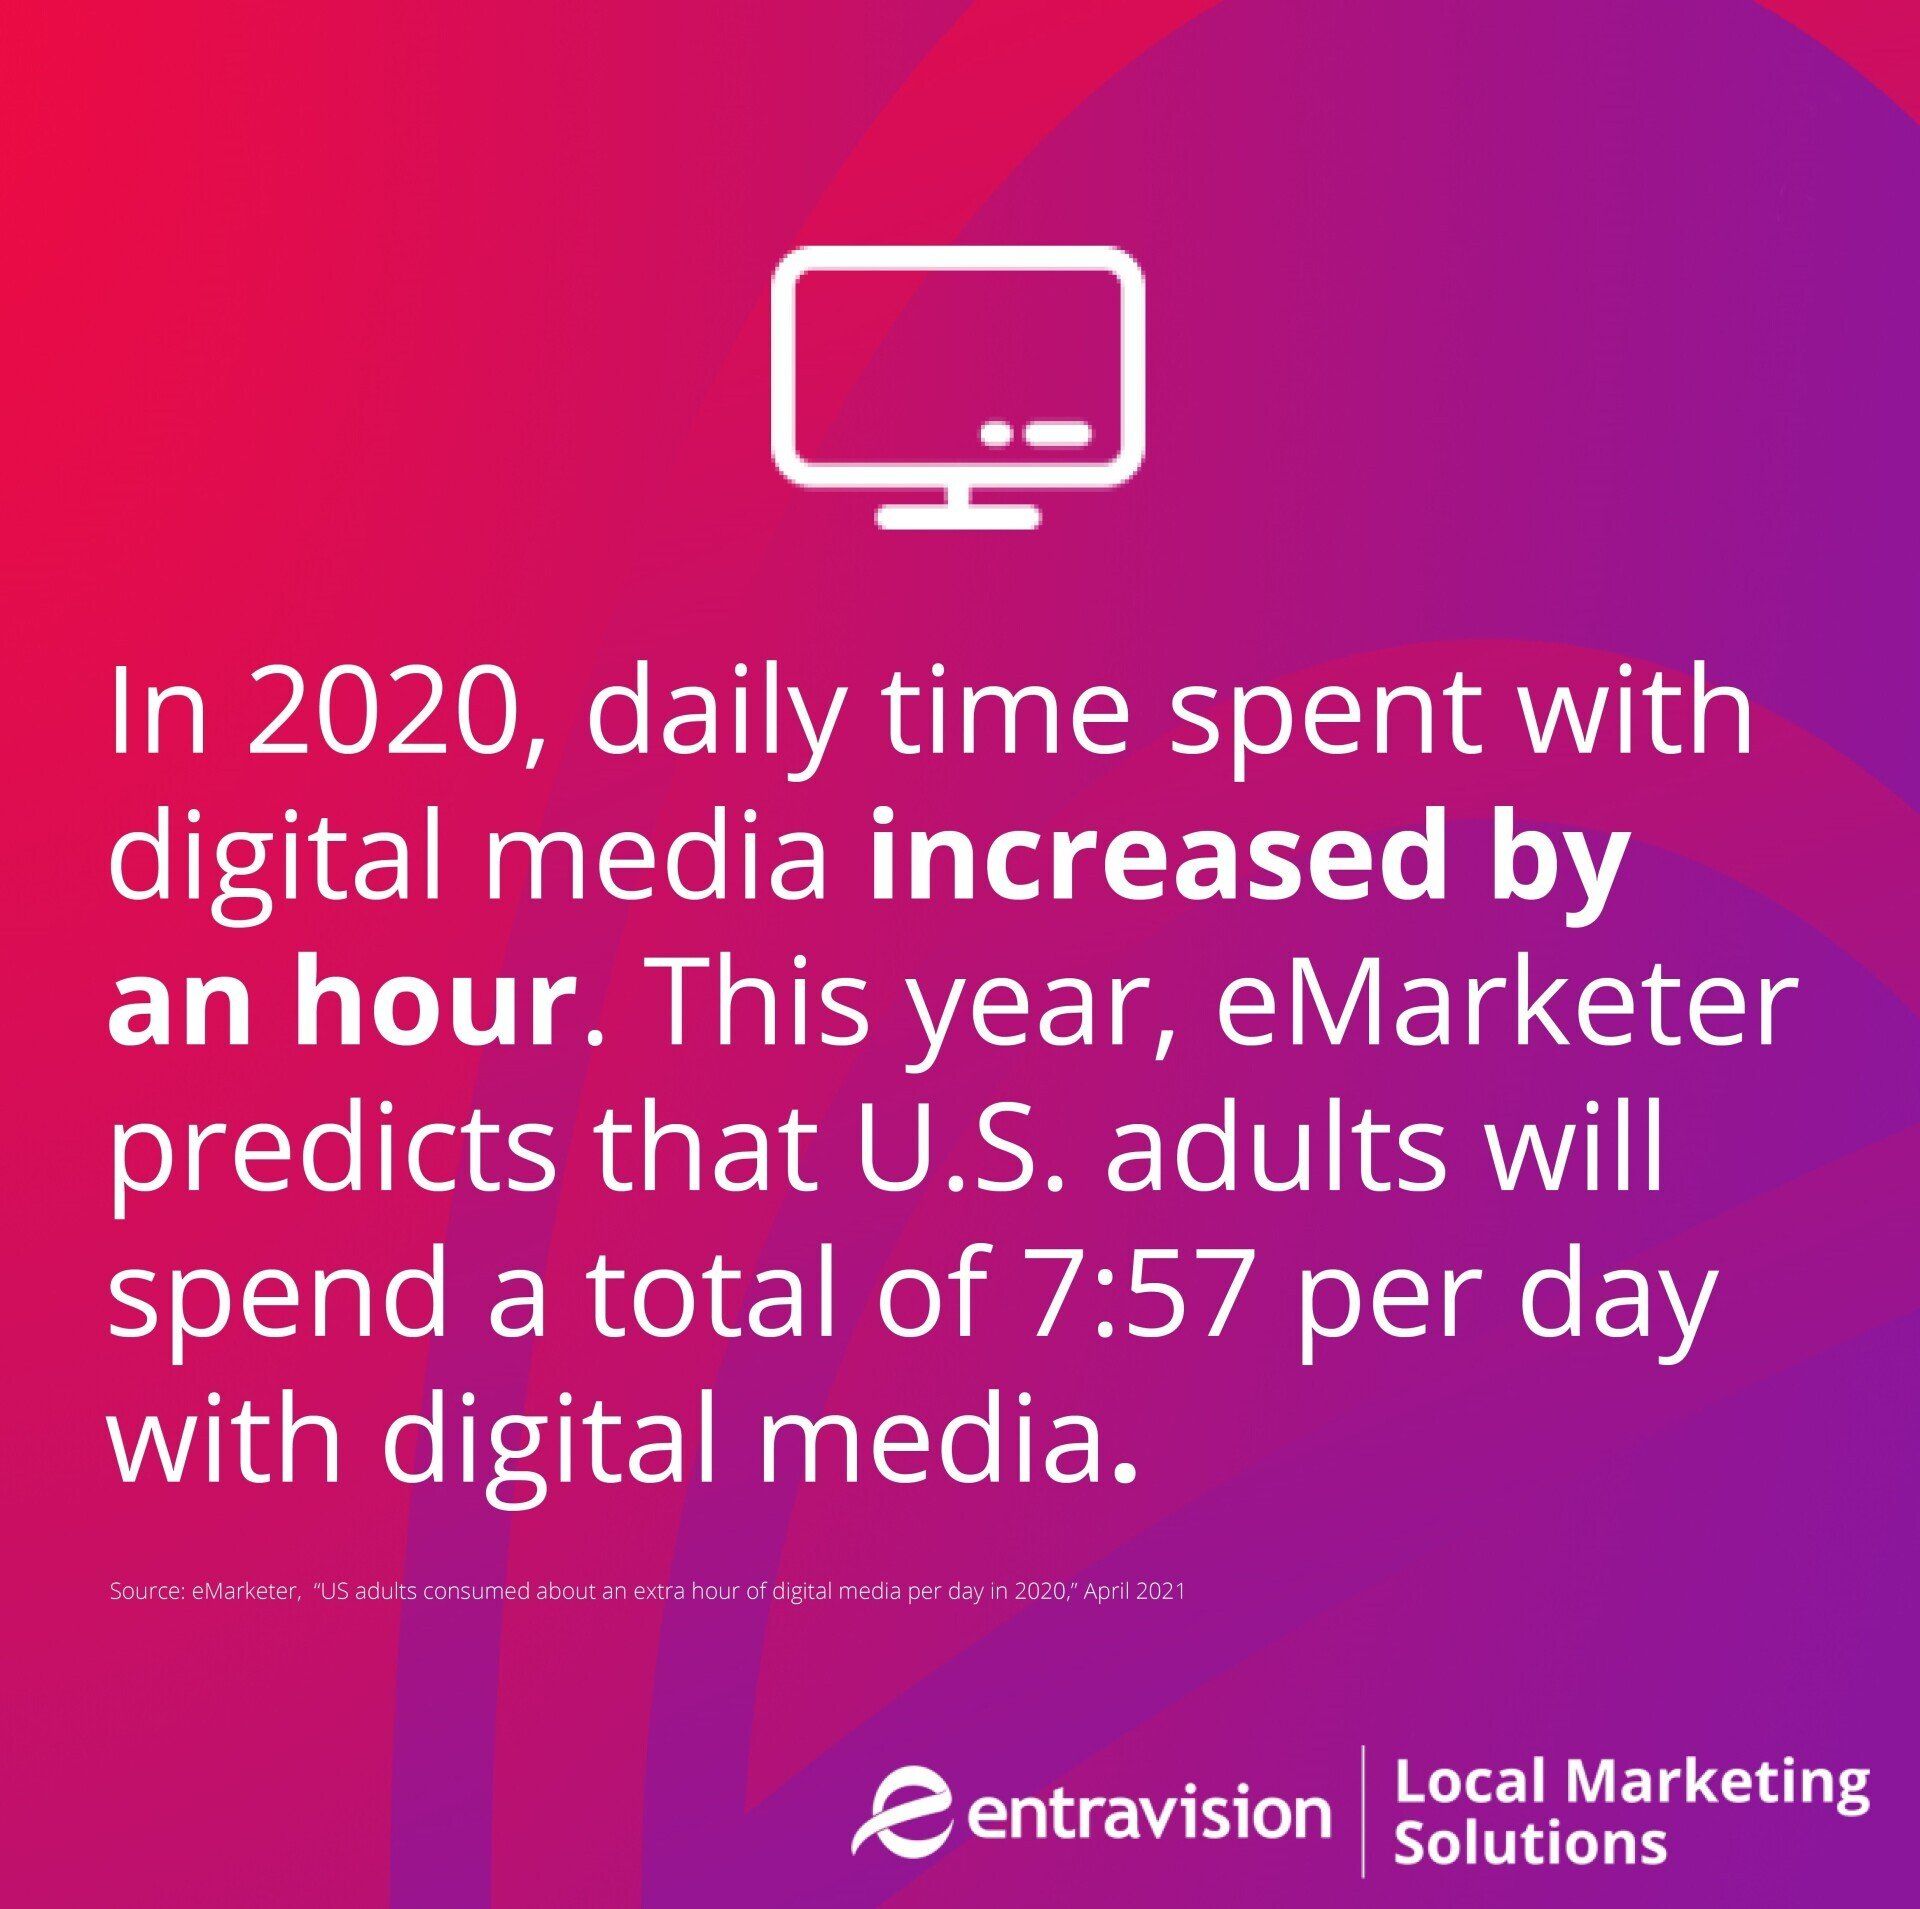 An Entravision infographic shows that daily time spent with media increased by an hour in 2020, making digital marketing an excellent way to connect with consumers.